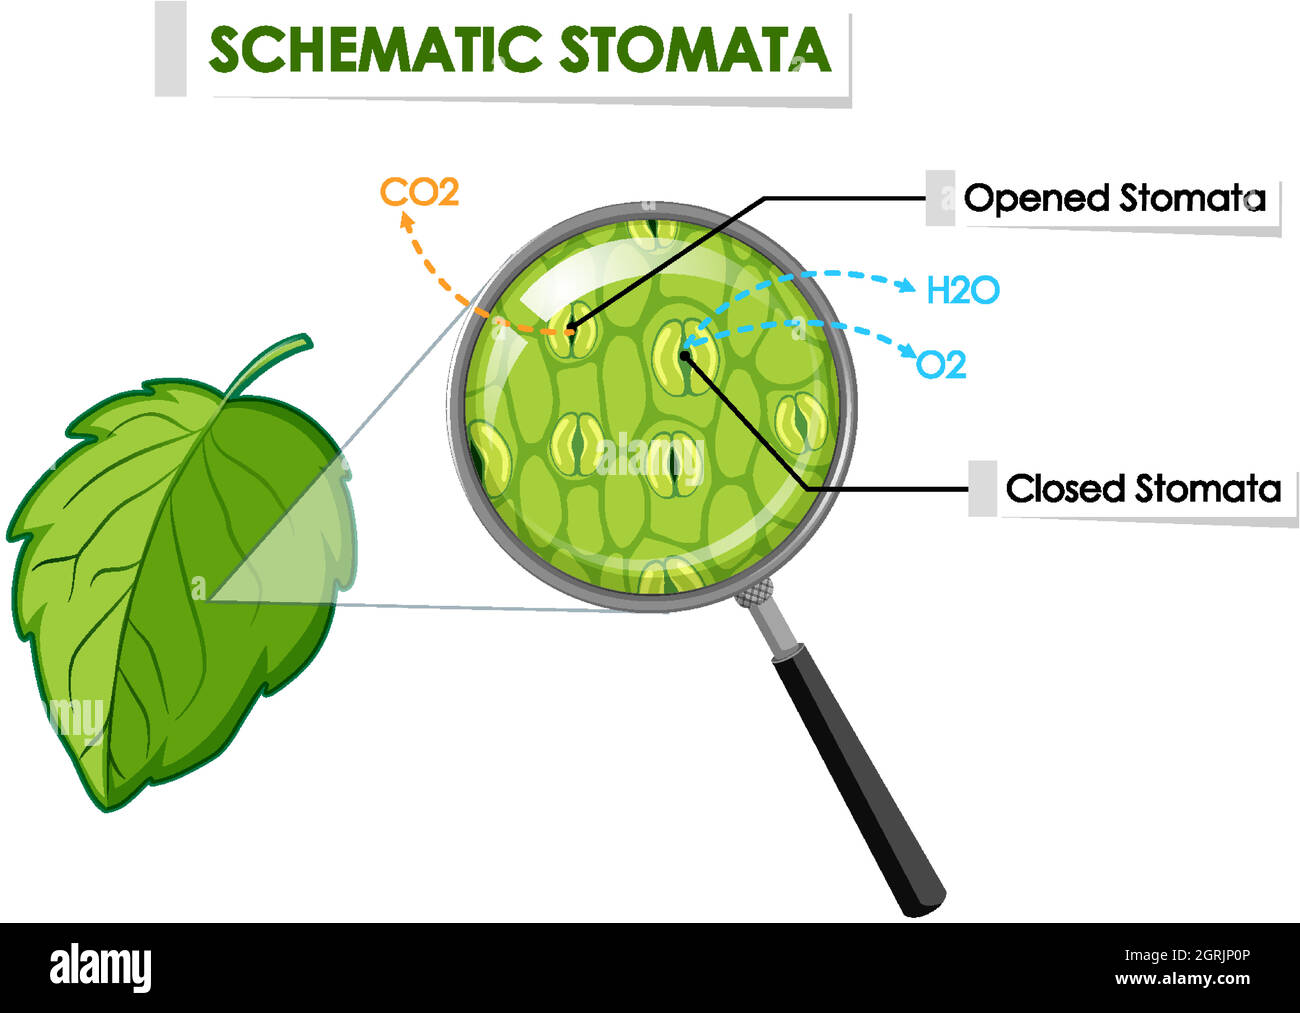 Diagram showing schematic stomata on leaf Stock Vector